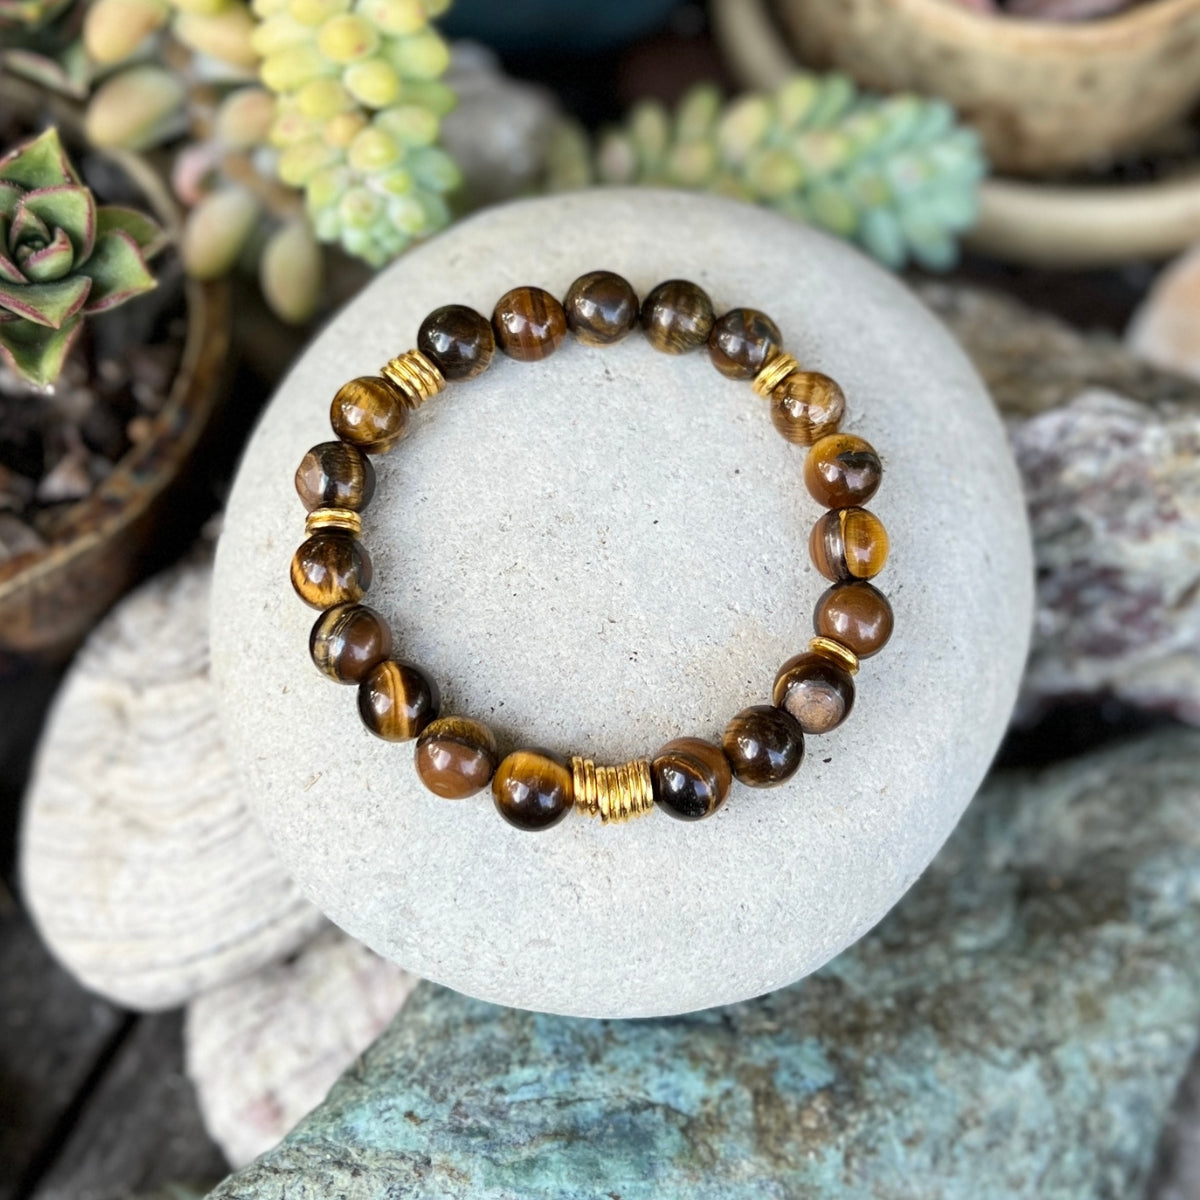 The "Leader of Courage" name encapsulates the essence of this bracelet, inviting you to embrace the leadership qualities of courage, wisdom, and determination. Wear it with pride as a reminder of your inner strength and the unwavering courage to face life's journey with resilience and grace.